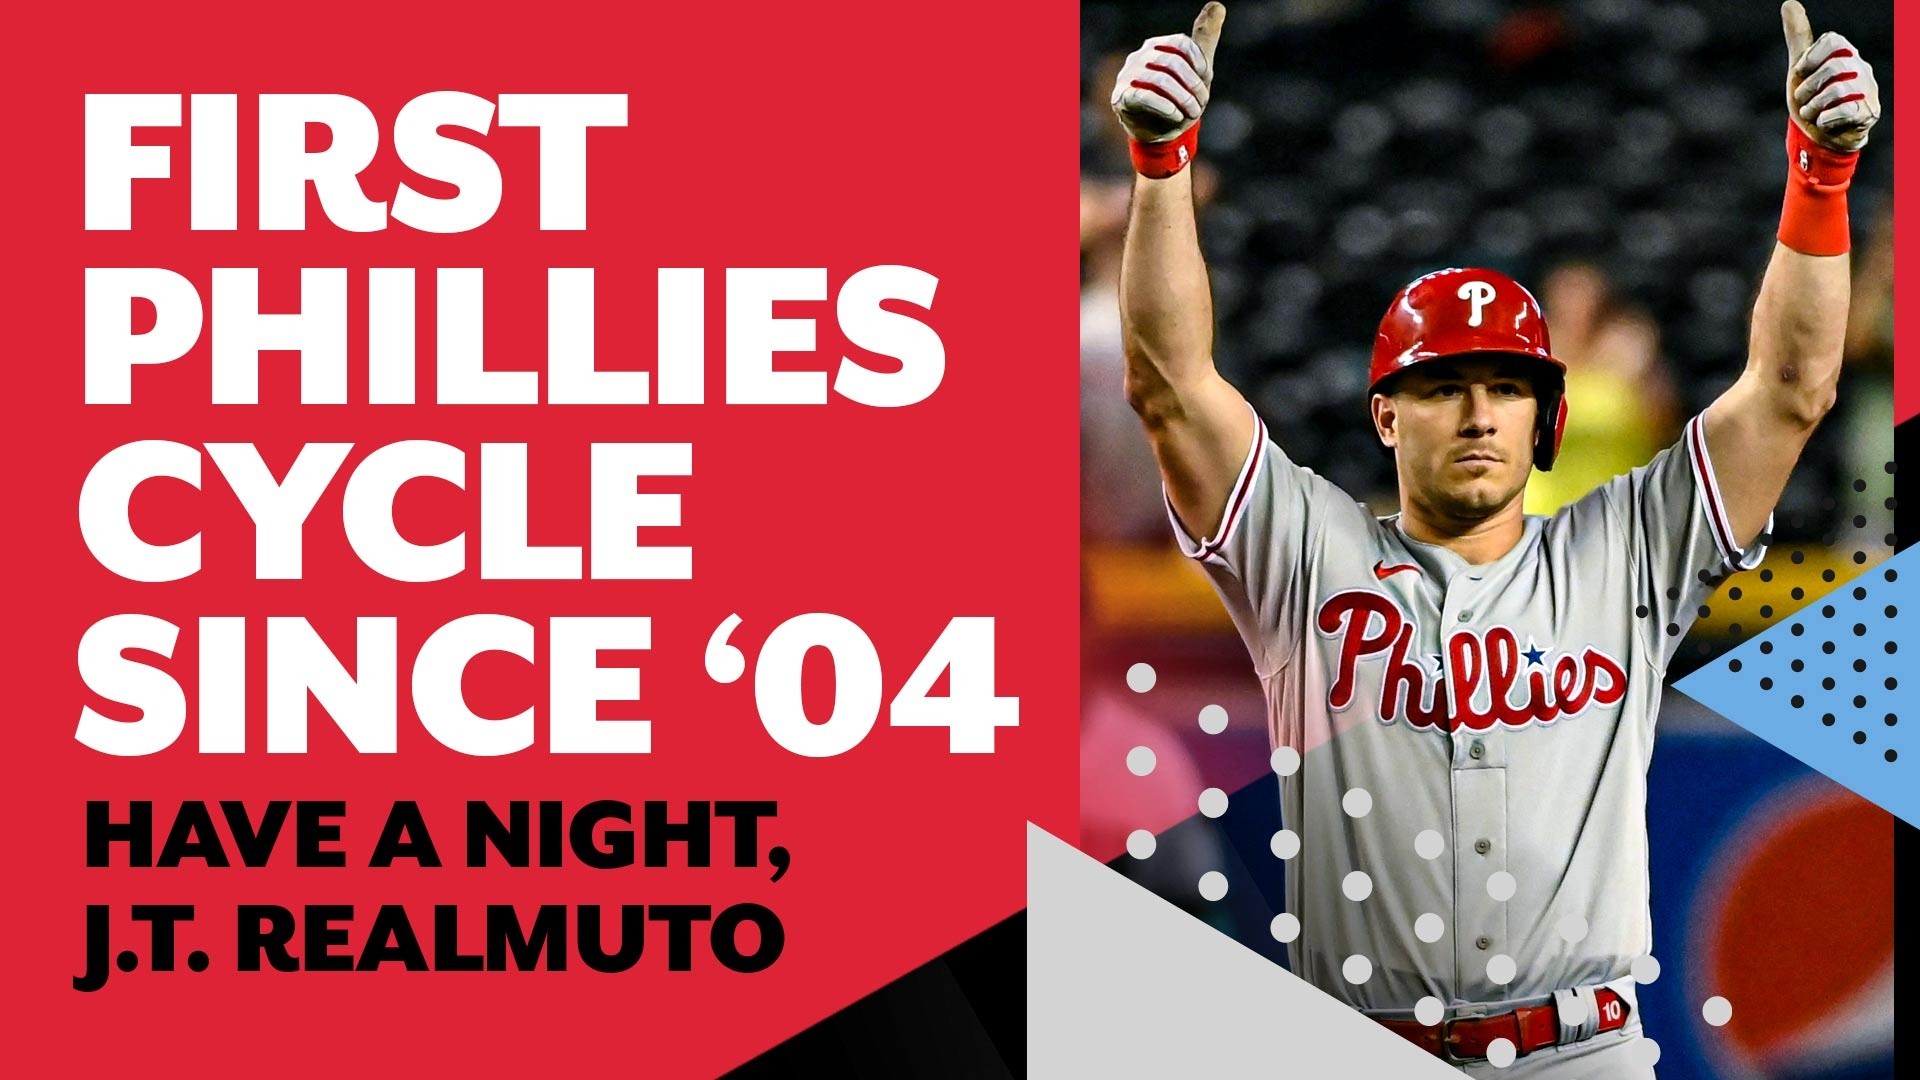 Realmuto Makes History, Hits 1st Phillies Cycle Since 2004 – NBC